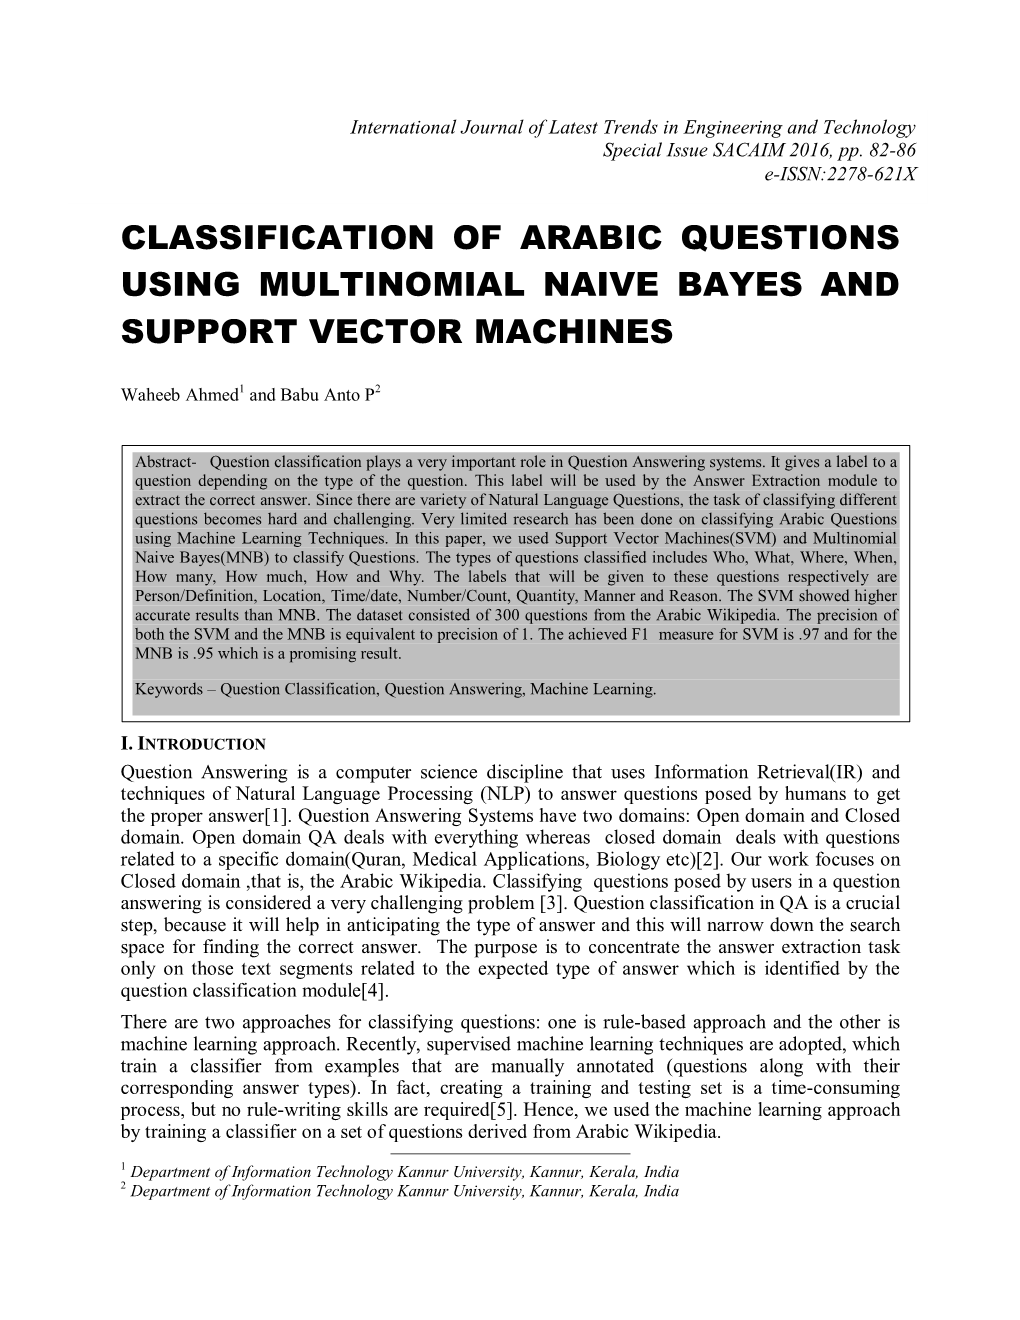 Classification of Arabic Questions Using Multinomial Naive Bayes and Support Vector Machines